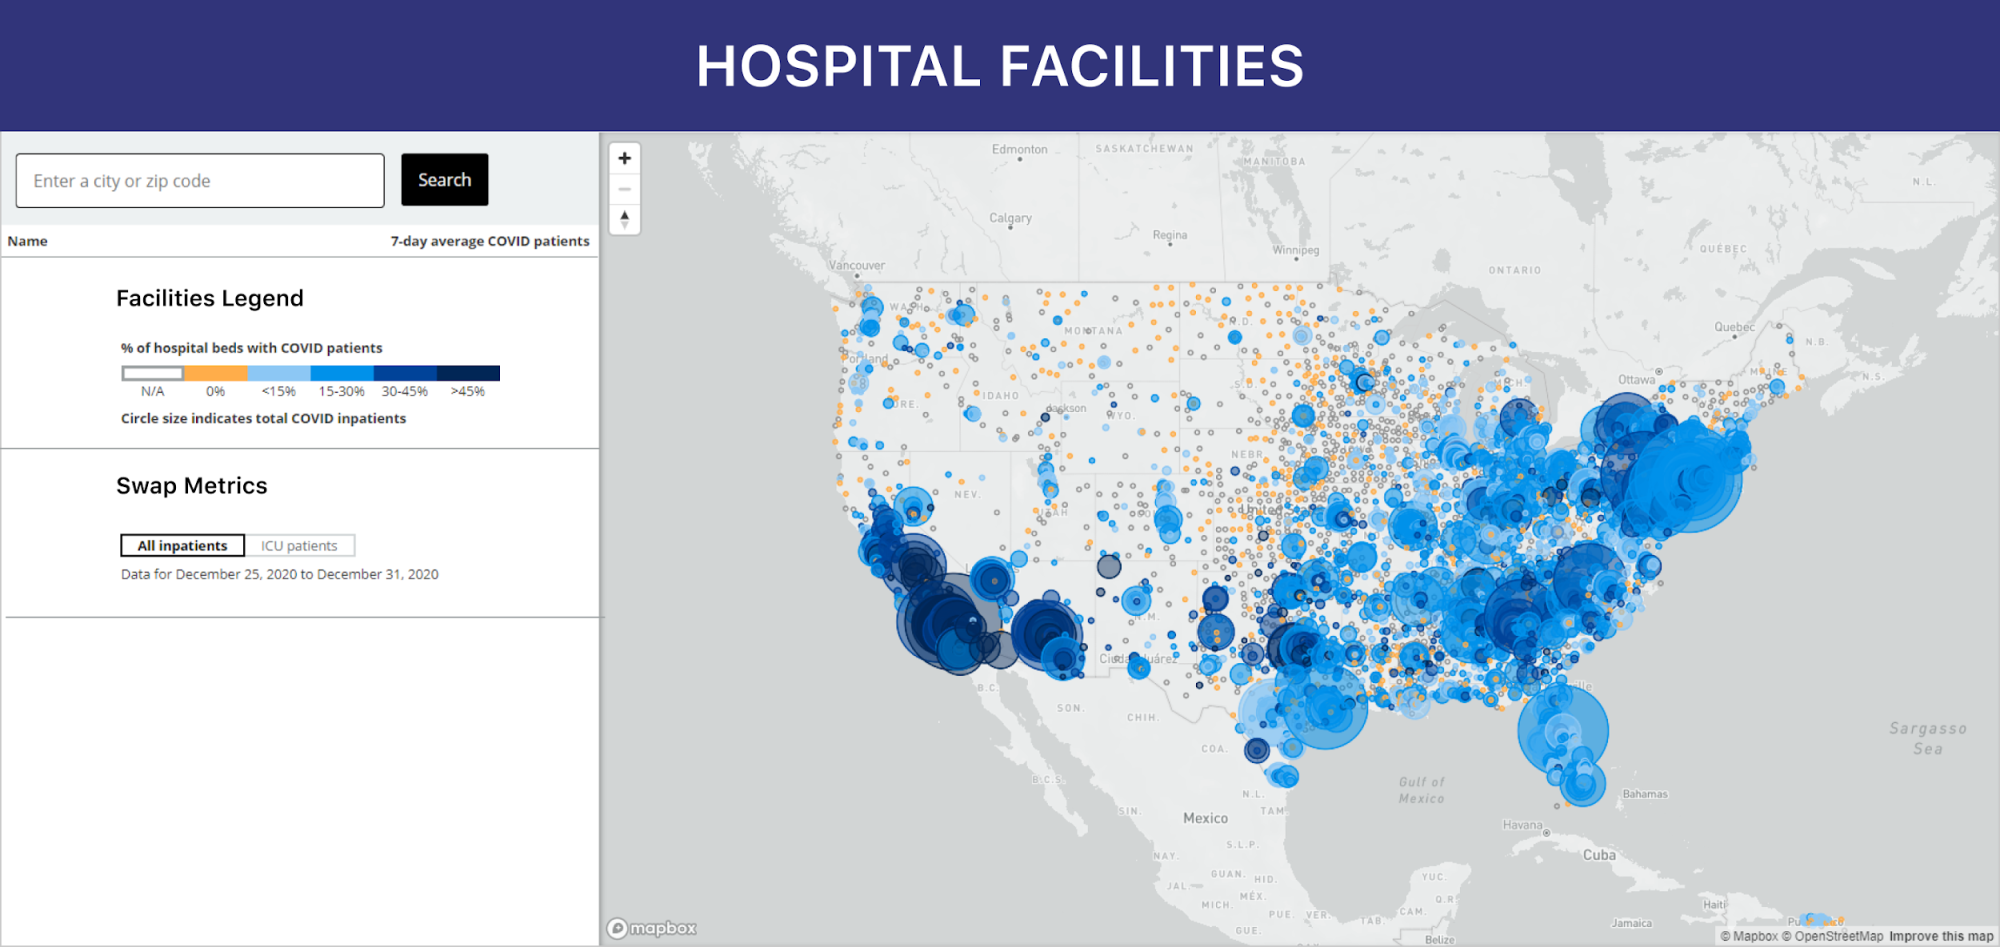 Interactive map of hospitals across the US, showing each facility's COVID-19 patient load and remaining bed capacity.